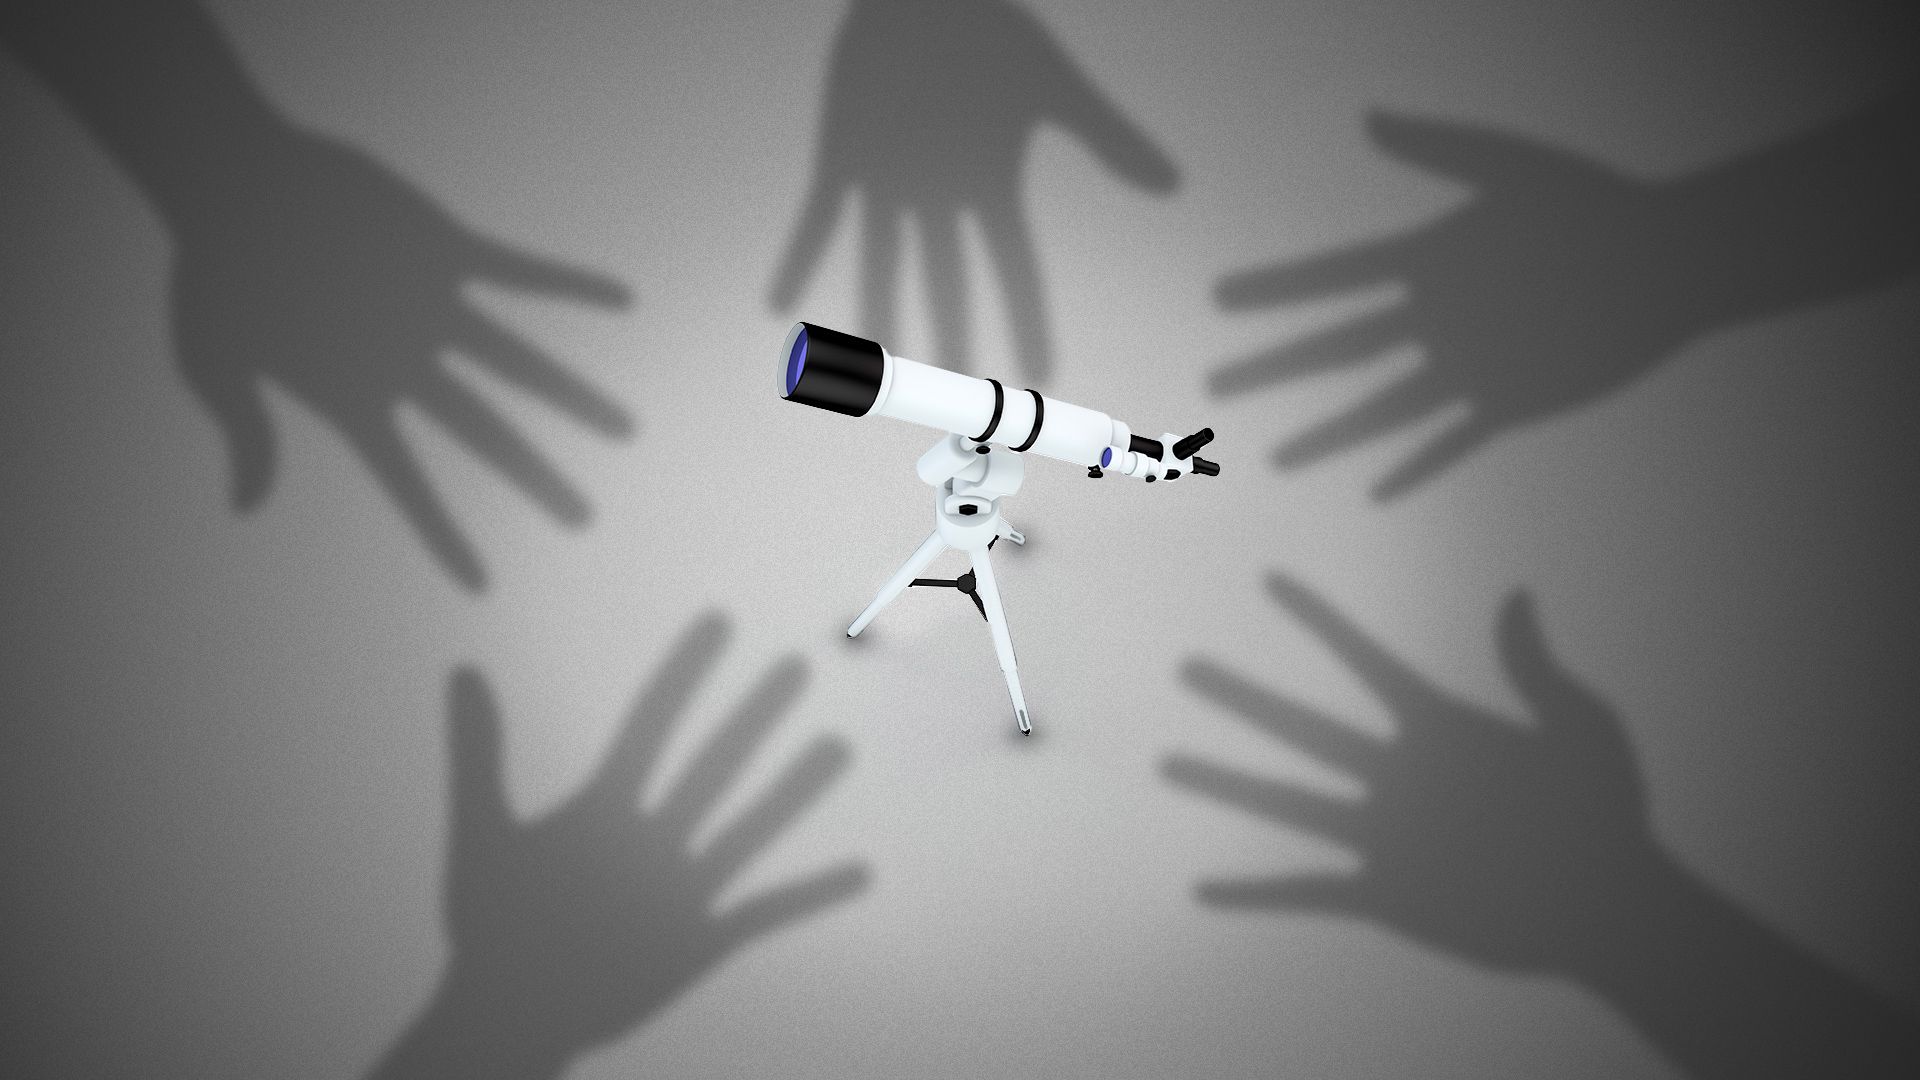 Illustration of a telescope from above with giant shadows of hands closing in around it.